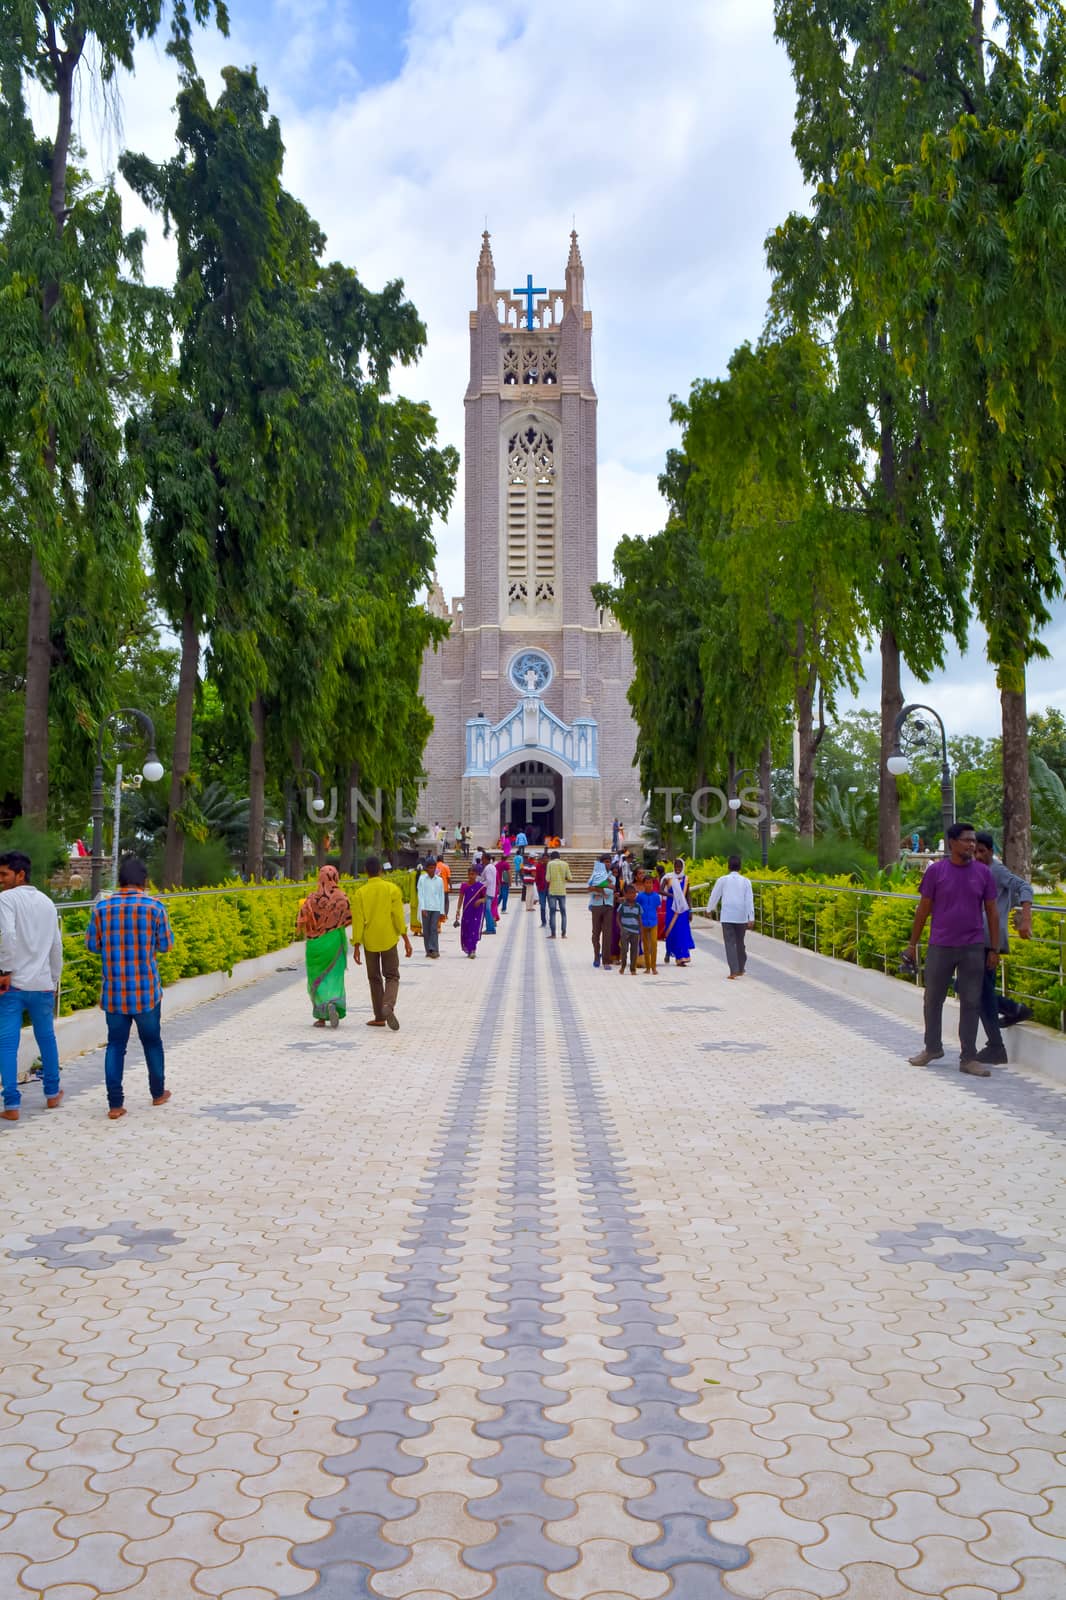 Medak Cathedral at Medak in Telangana, India, is one of the largest churches in India and has been the cathedral church of the Diocese of Medak of the Church of South India